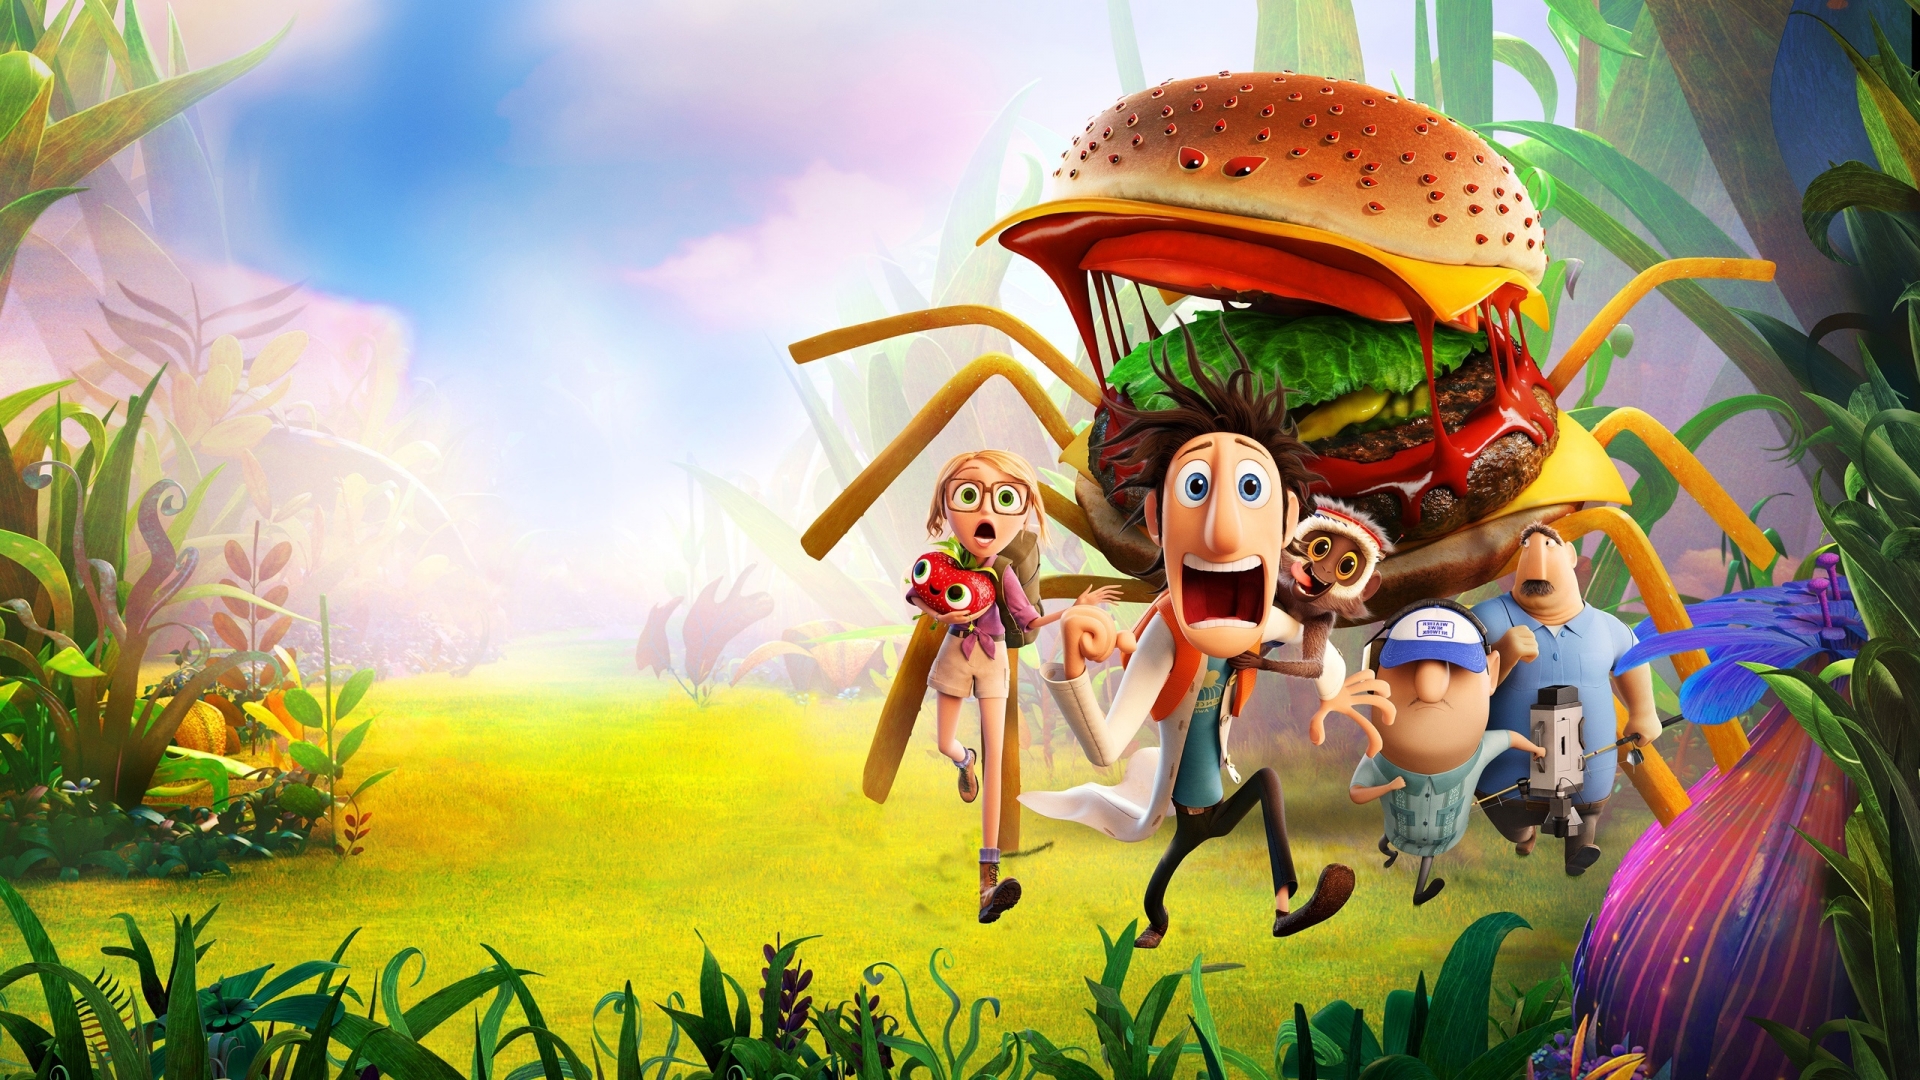 Cloudy with a chance of Meatballs for 1920 x 1080 HDTV 1080p resolution